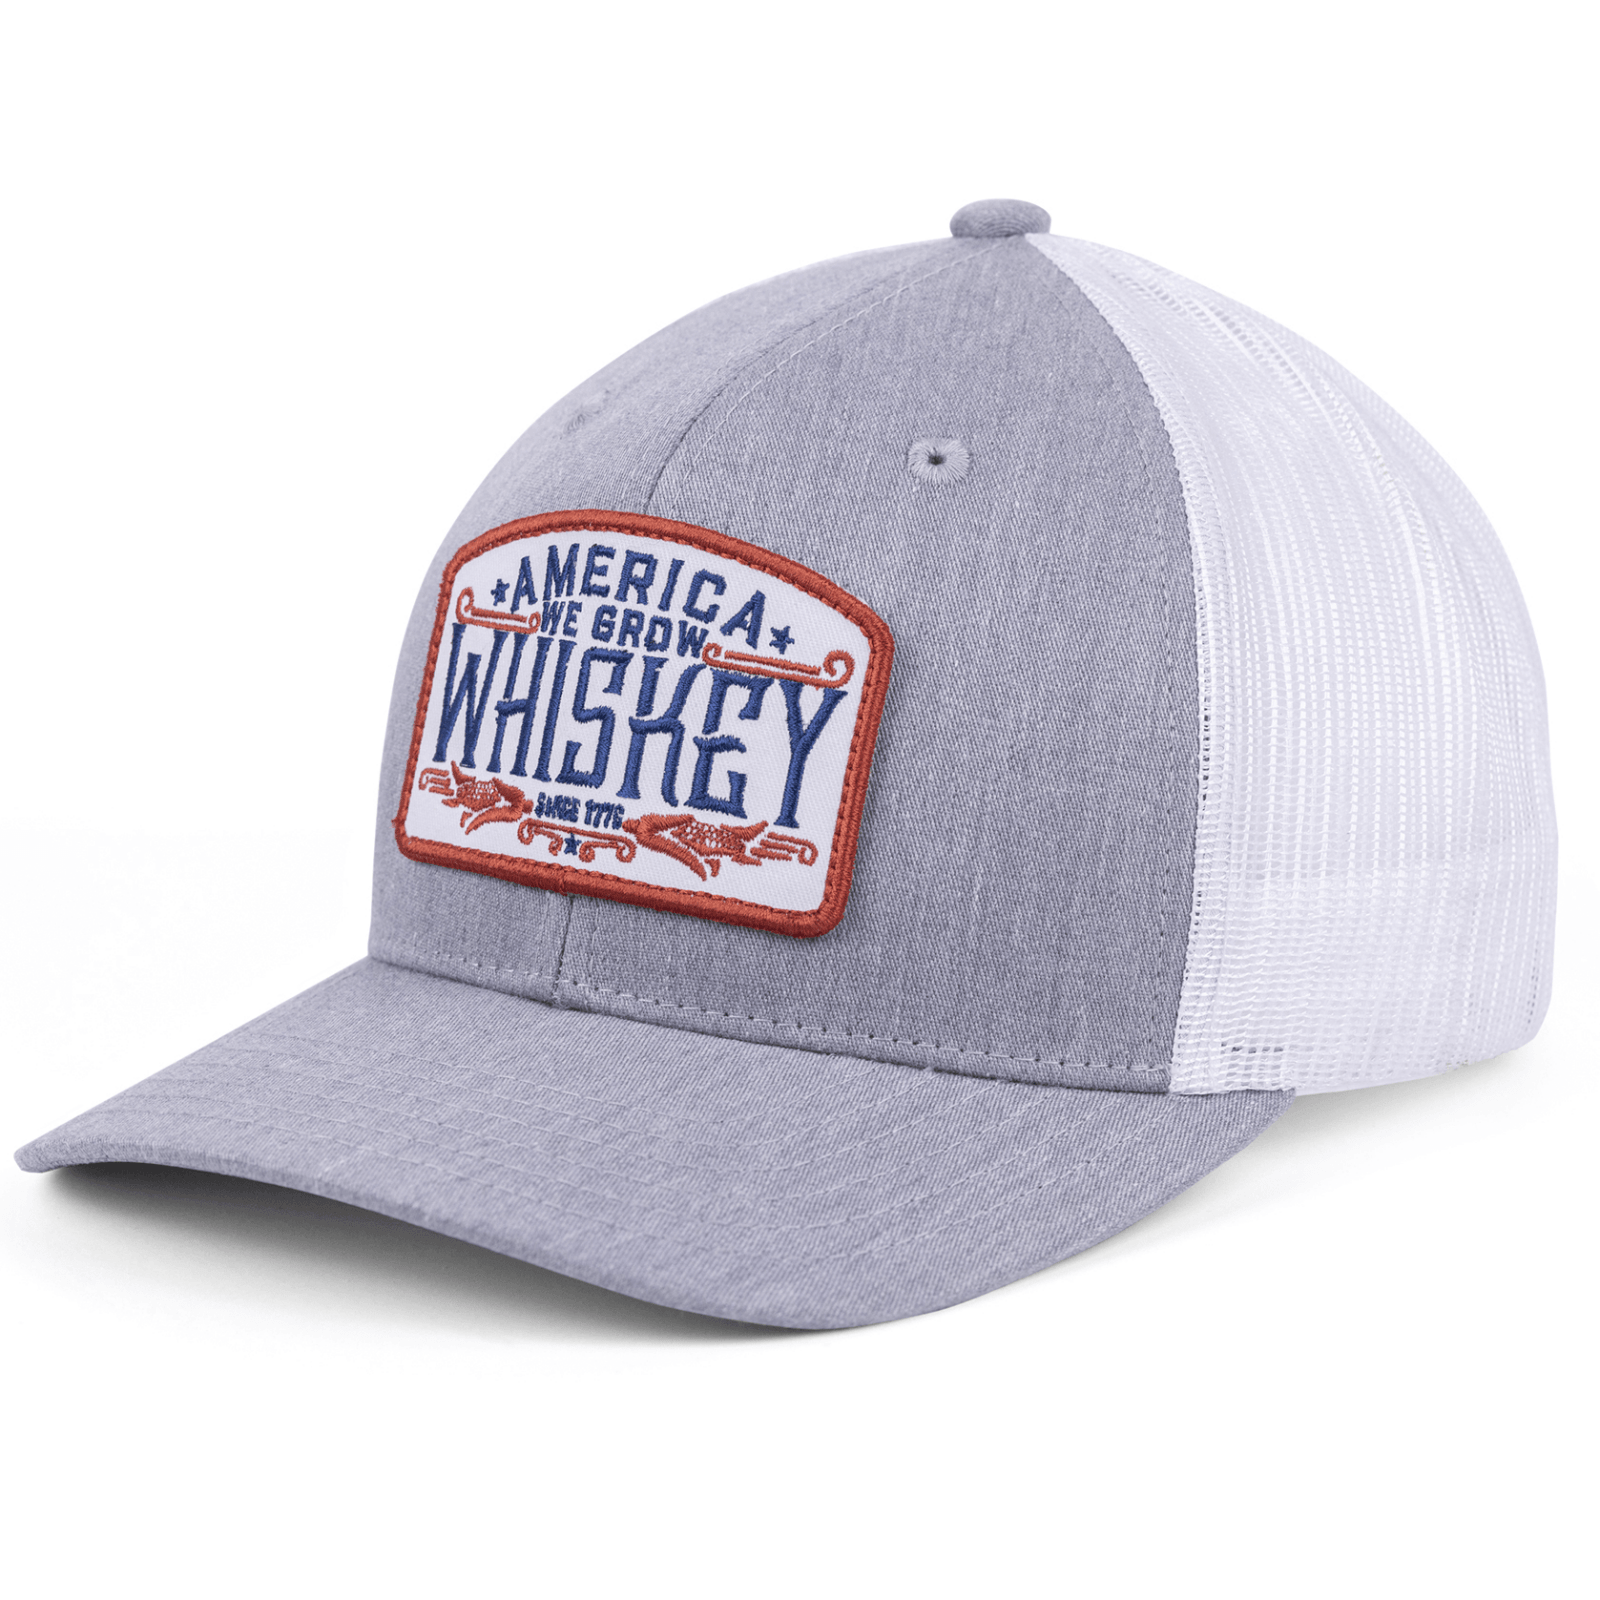 Rural Cloth Hats We Grow Whiskey Hat-Gray/White